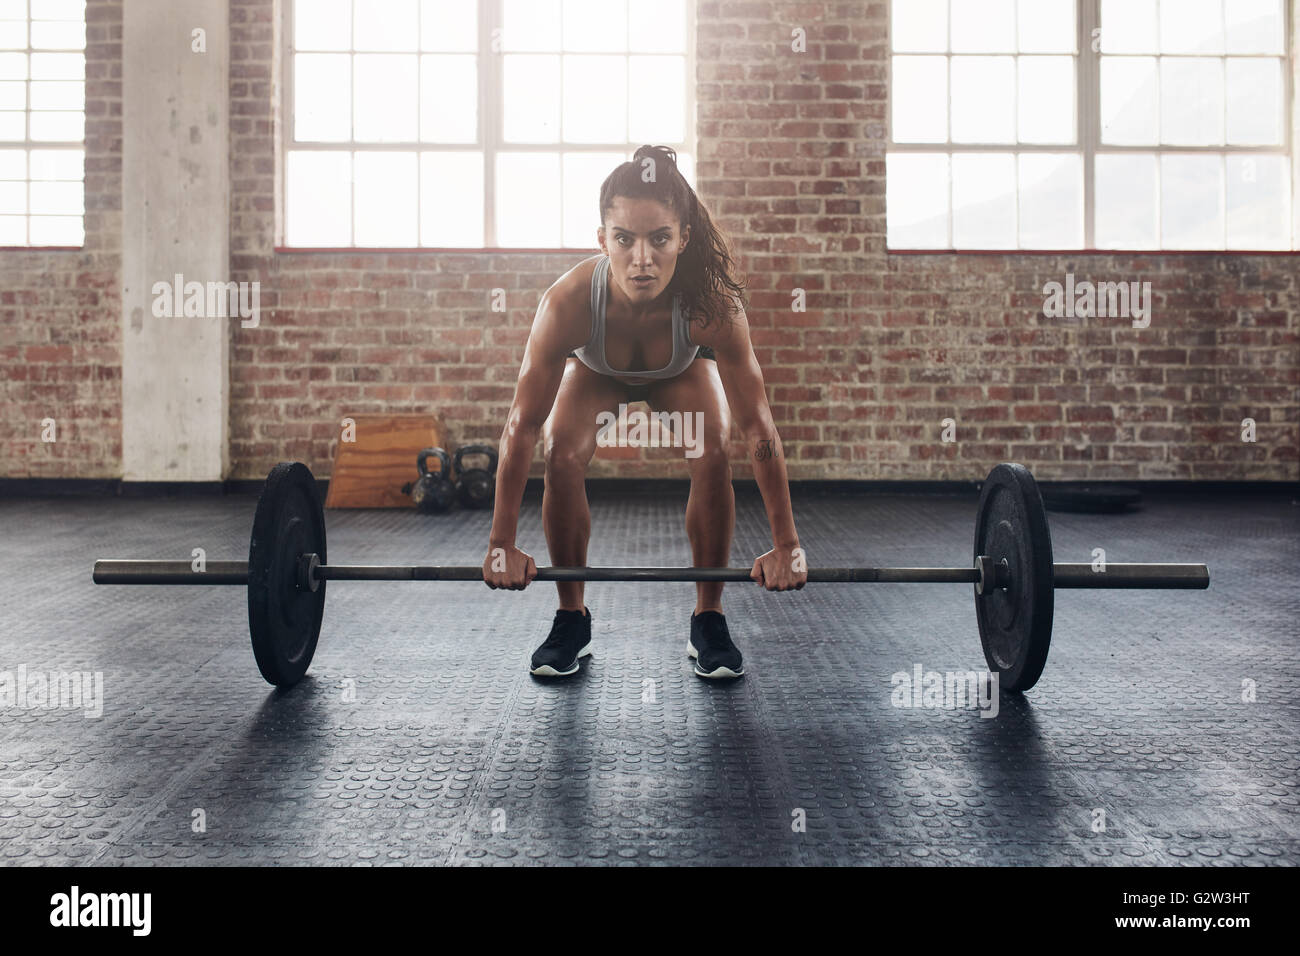 Female performing deadlift exercise with weight bar. Confident young woman doing weight lifting workout at gym. Stock Photo